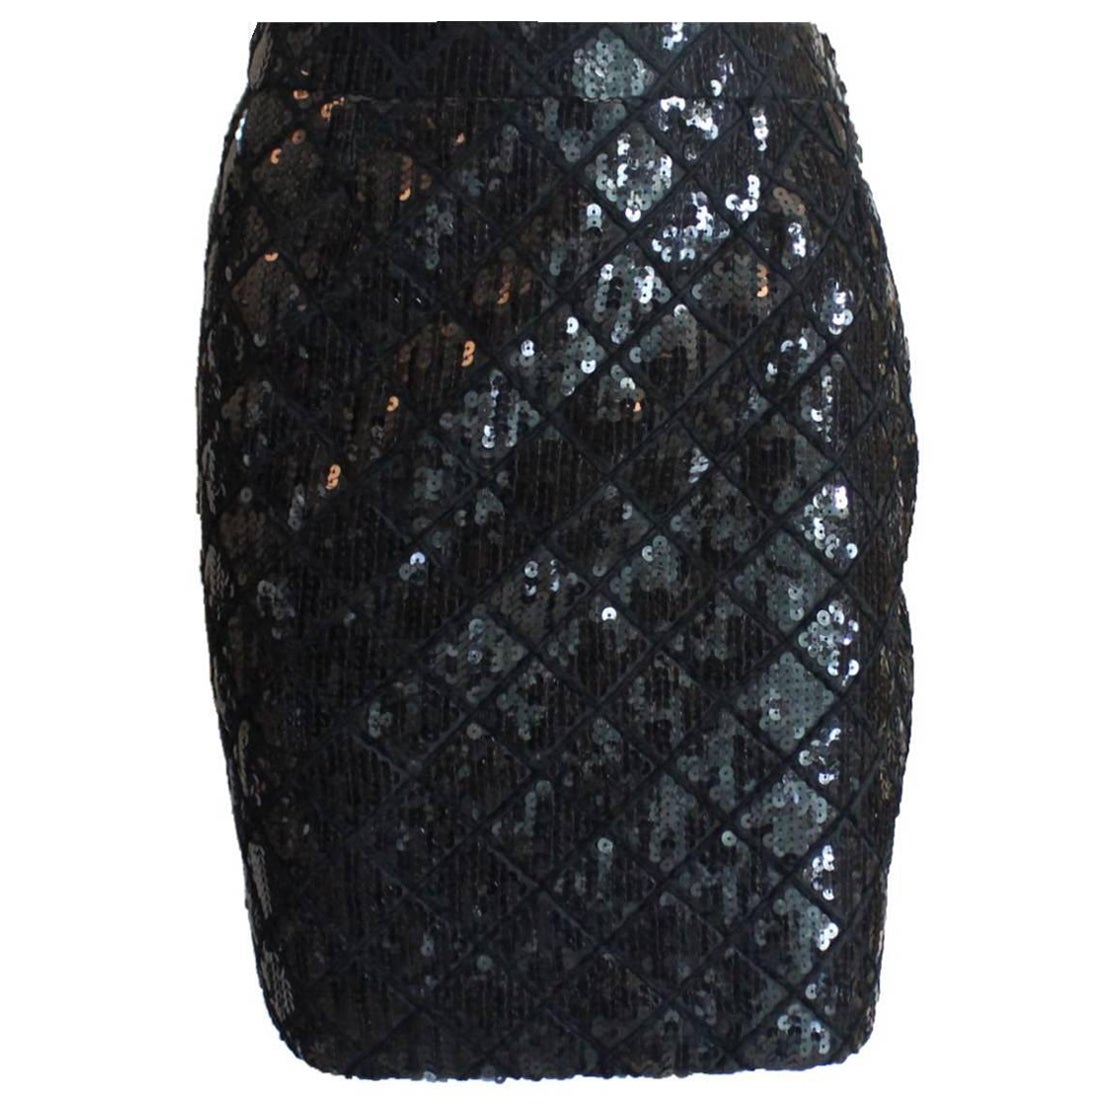 CHANEL by Karl Lagerfeld Quilted Sequin Skirt  1989 as seen in Met Museum NYC 36